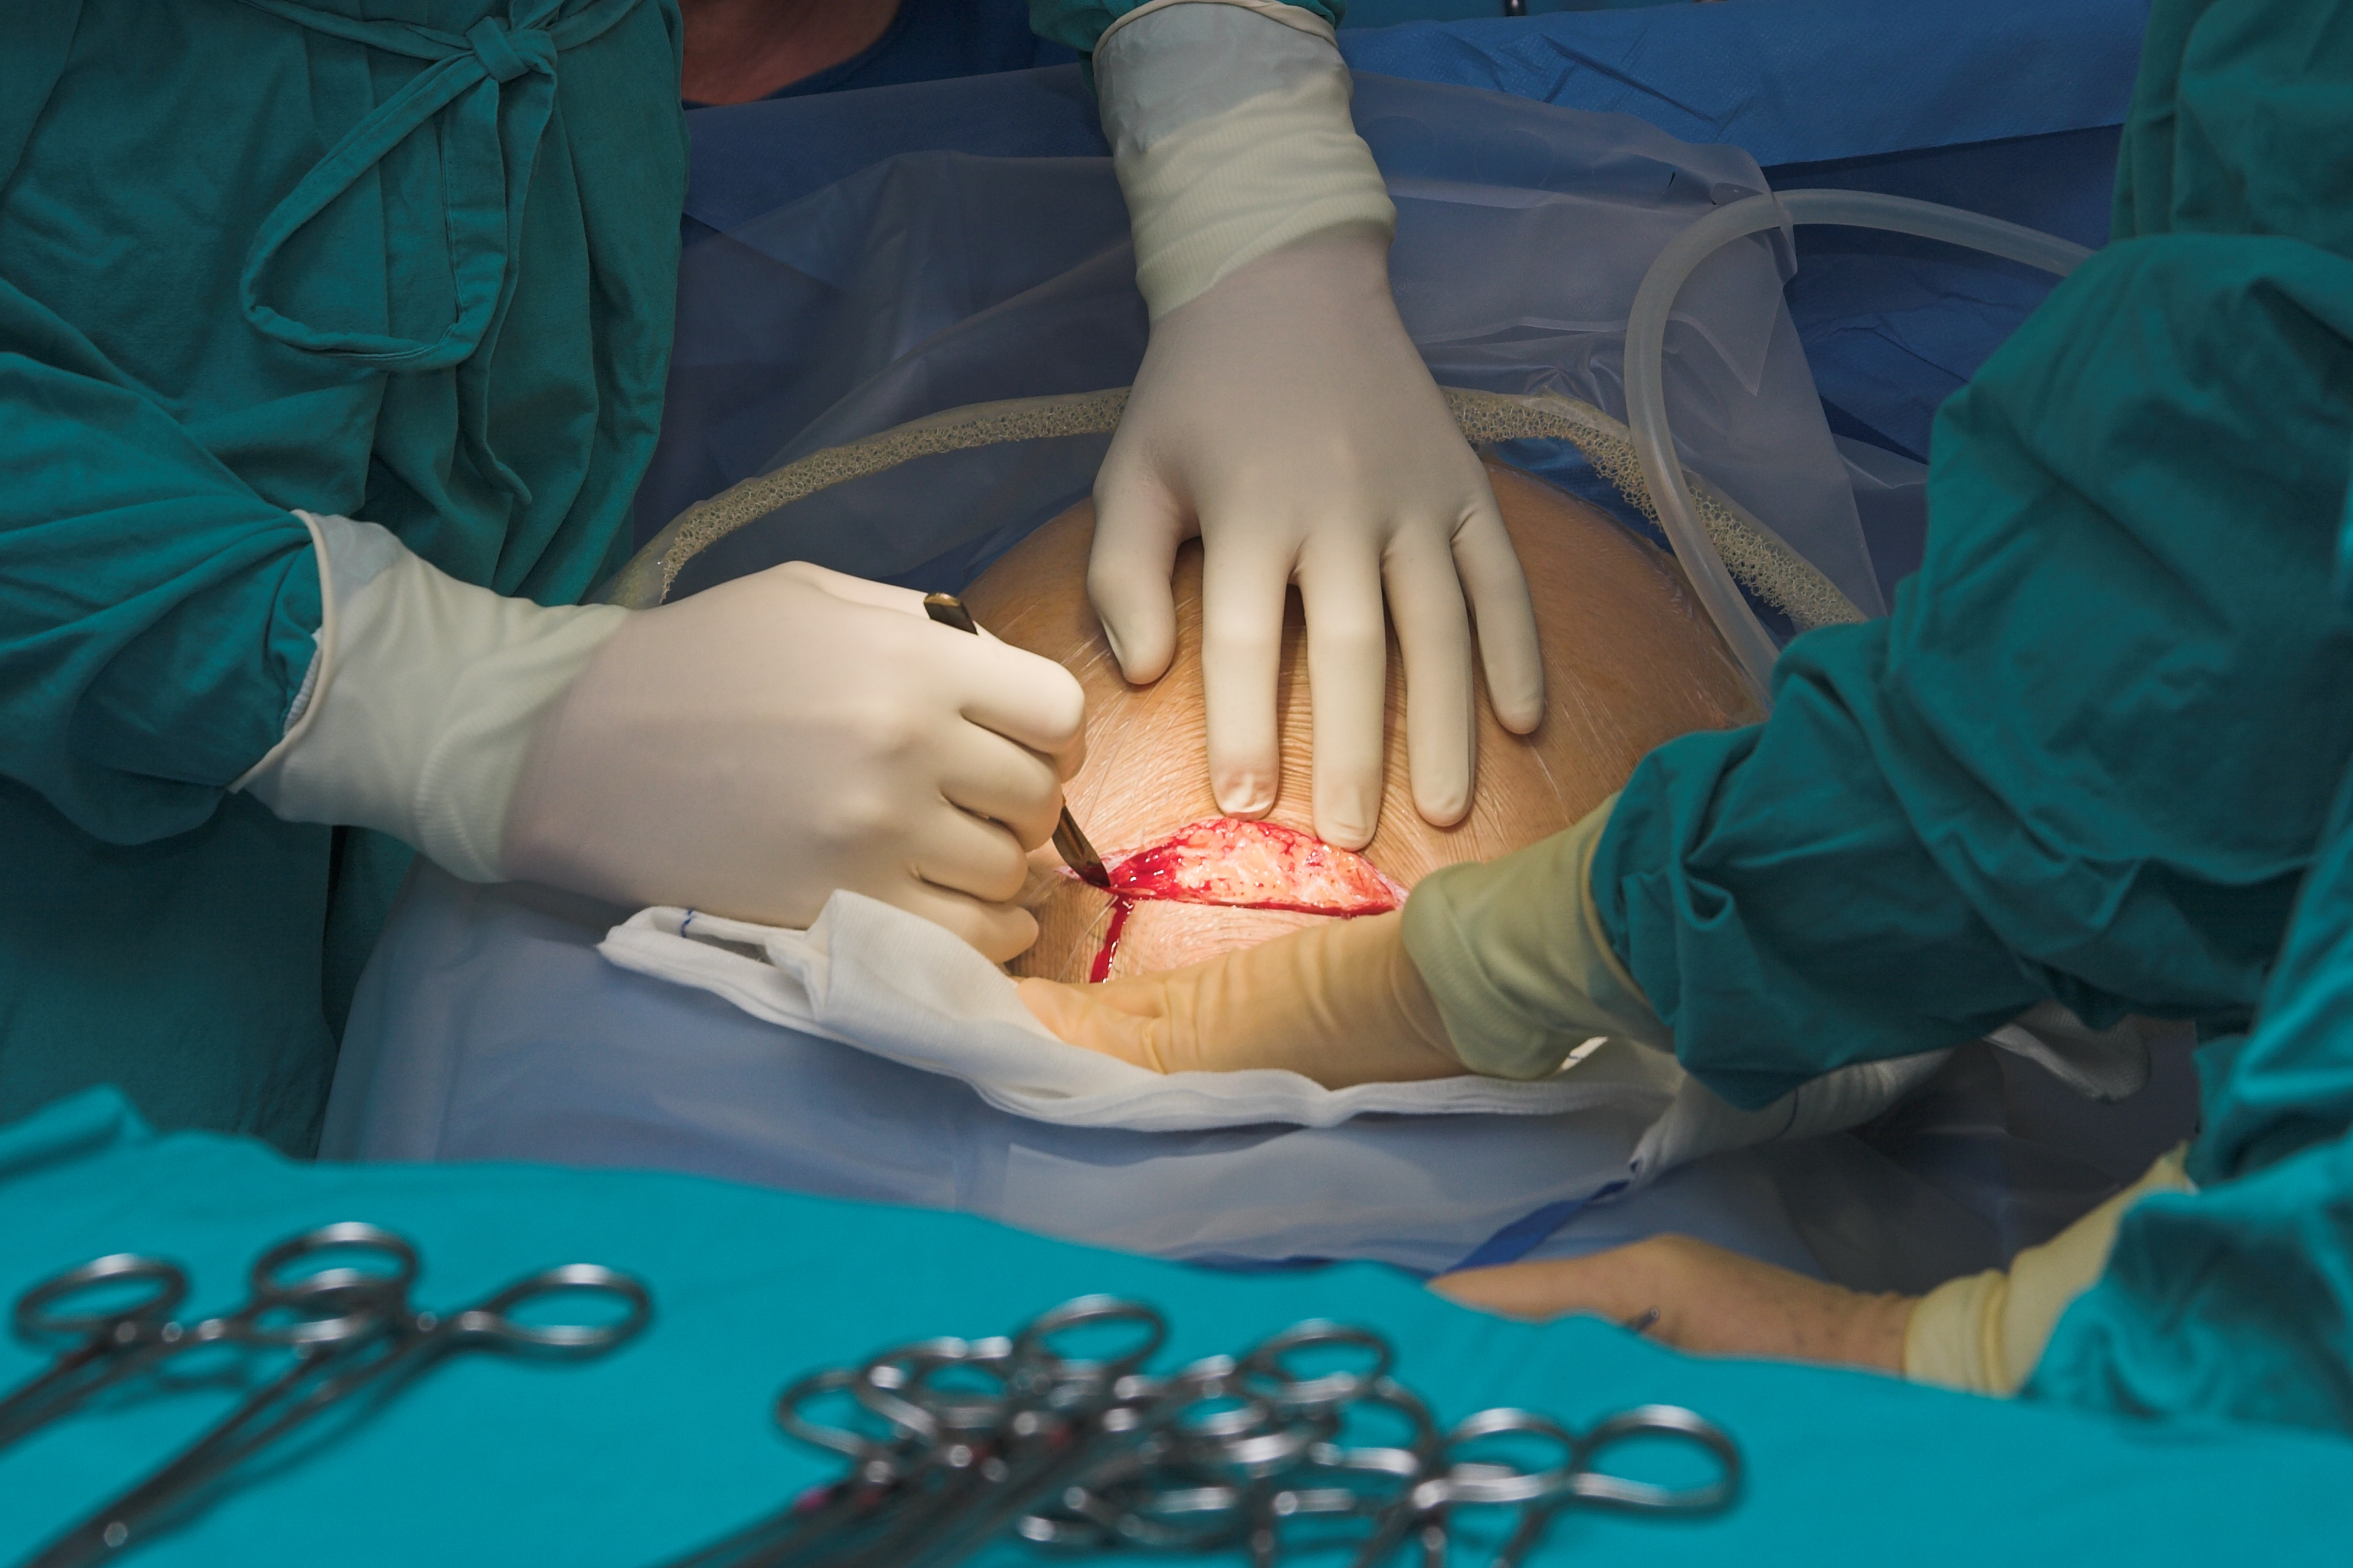 What Happens During a C-Section Procedure?